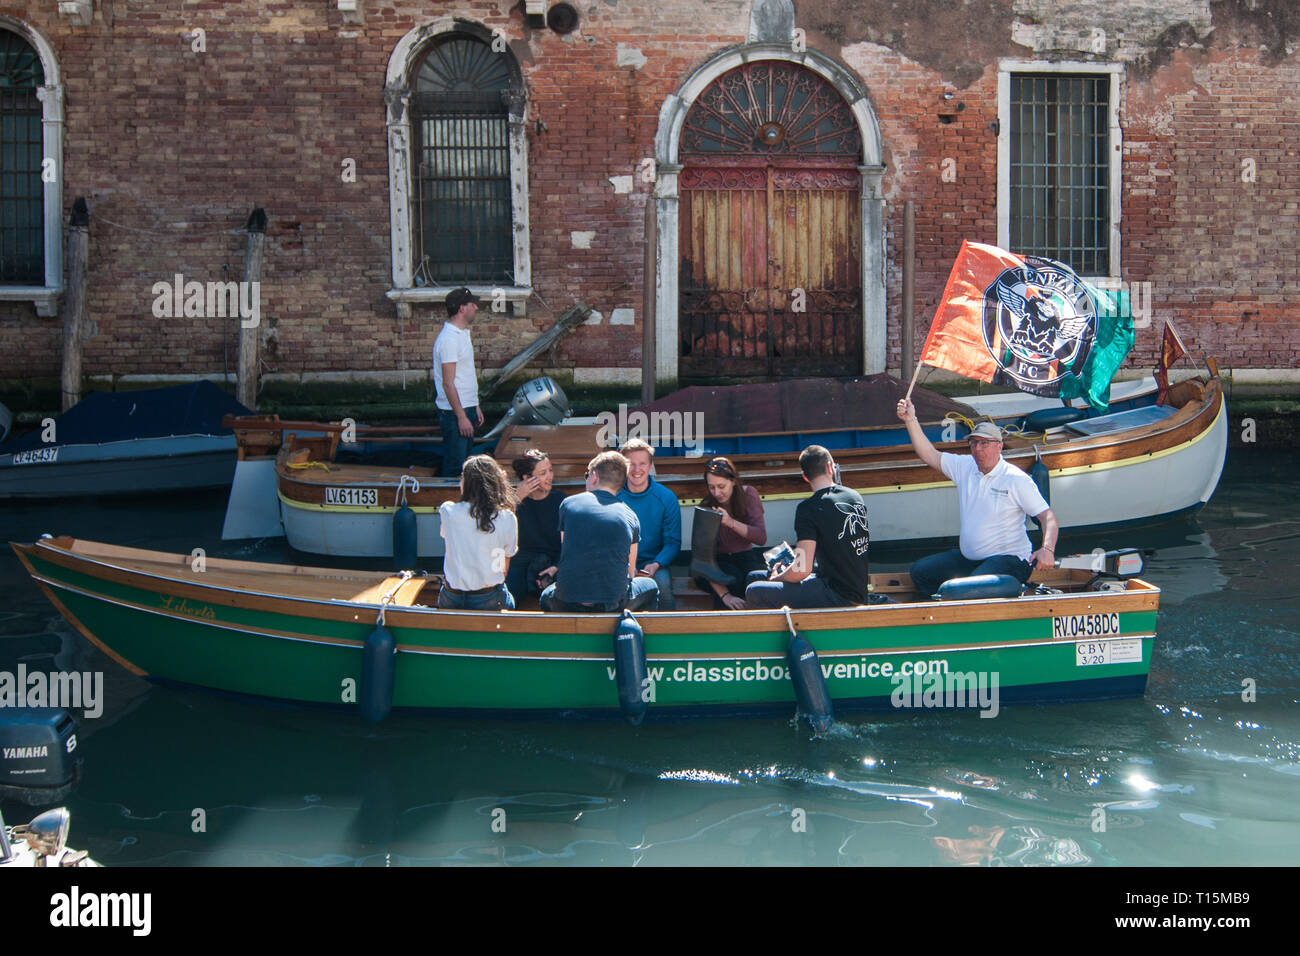 Venice, Italy - 23th March, 2019. An electric boat start to go to clean a designated site of the shoals of the city on 23 March 2019, in Venice Italy. 'Kick Plastic Out' is an event organized by Classic Boats Venice and the 'Venice Calls' youth association, and it is a day dedicated to cleaning canals and shoals adjacent to the historic city of Venice using only electric propulsion boats or oars, an initiative launched by young people to help clean the Venetian lagoon. © Simone Padovani / Awakening / Alamy Live News Stock Photo